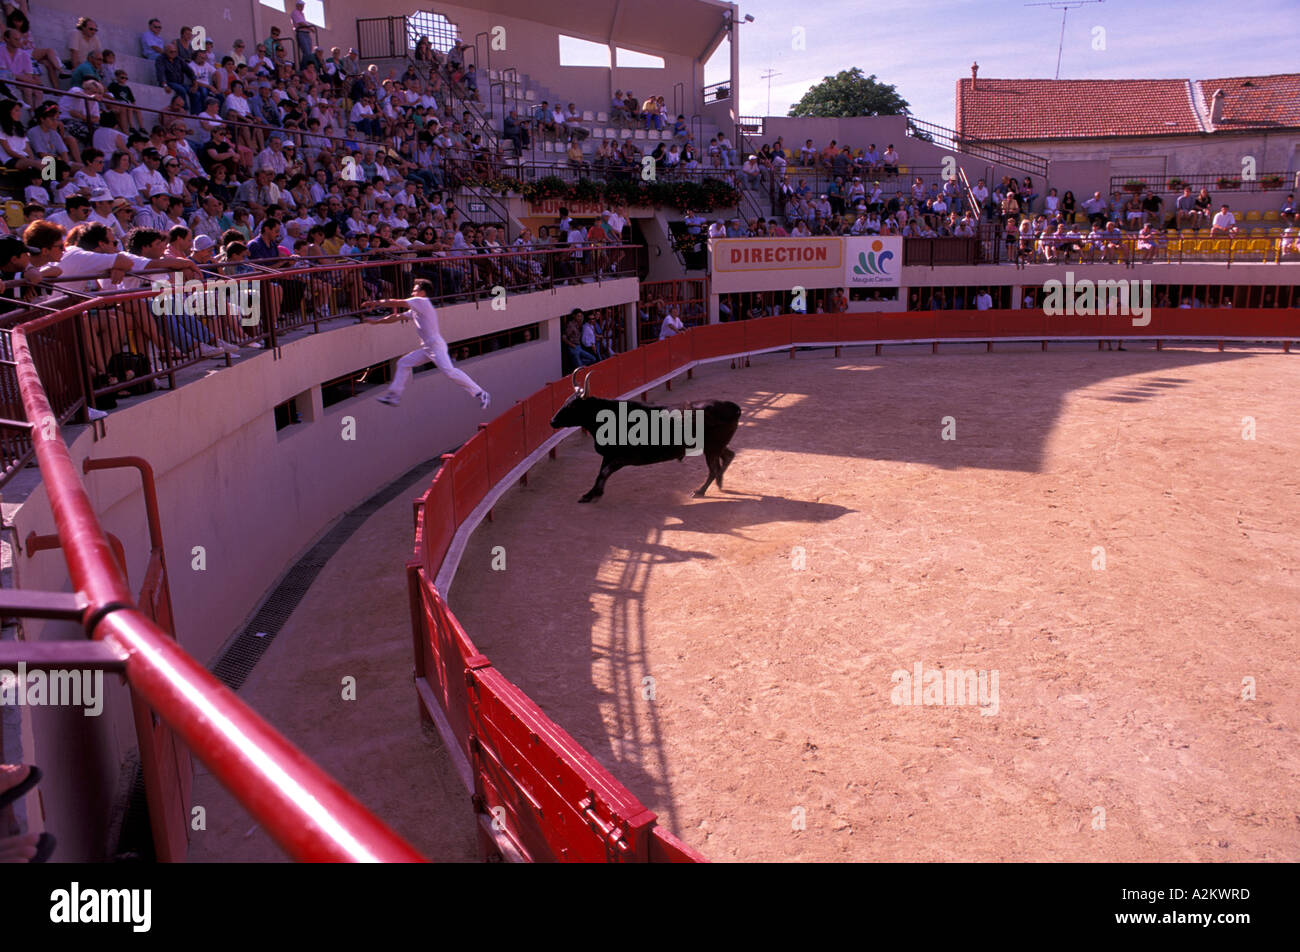 Europe, France, Languedoc, TUI Arena, course Camarguaise Banque D'Images